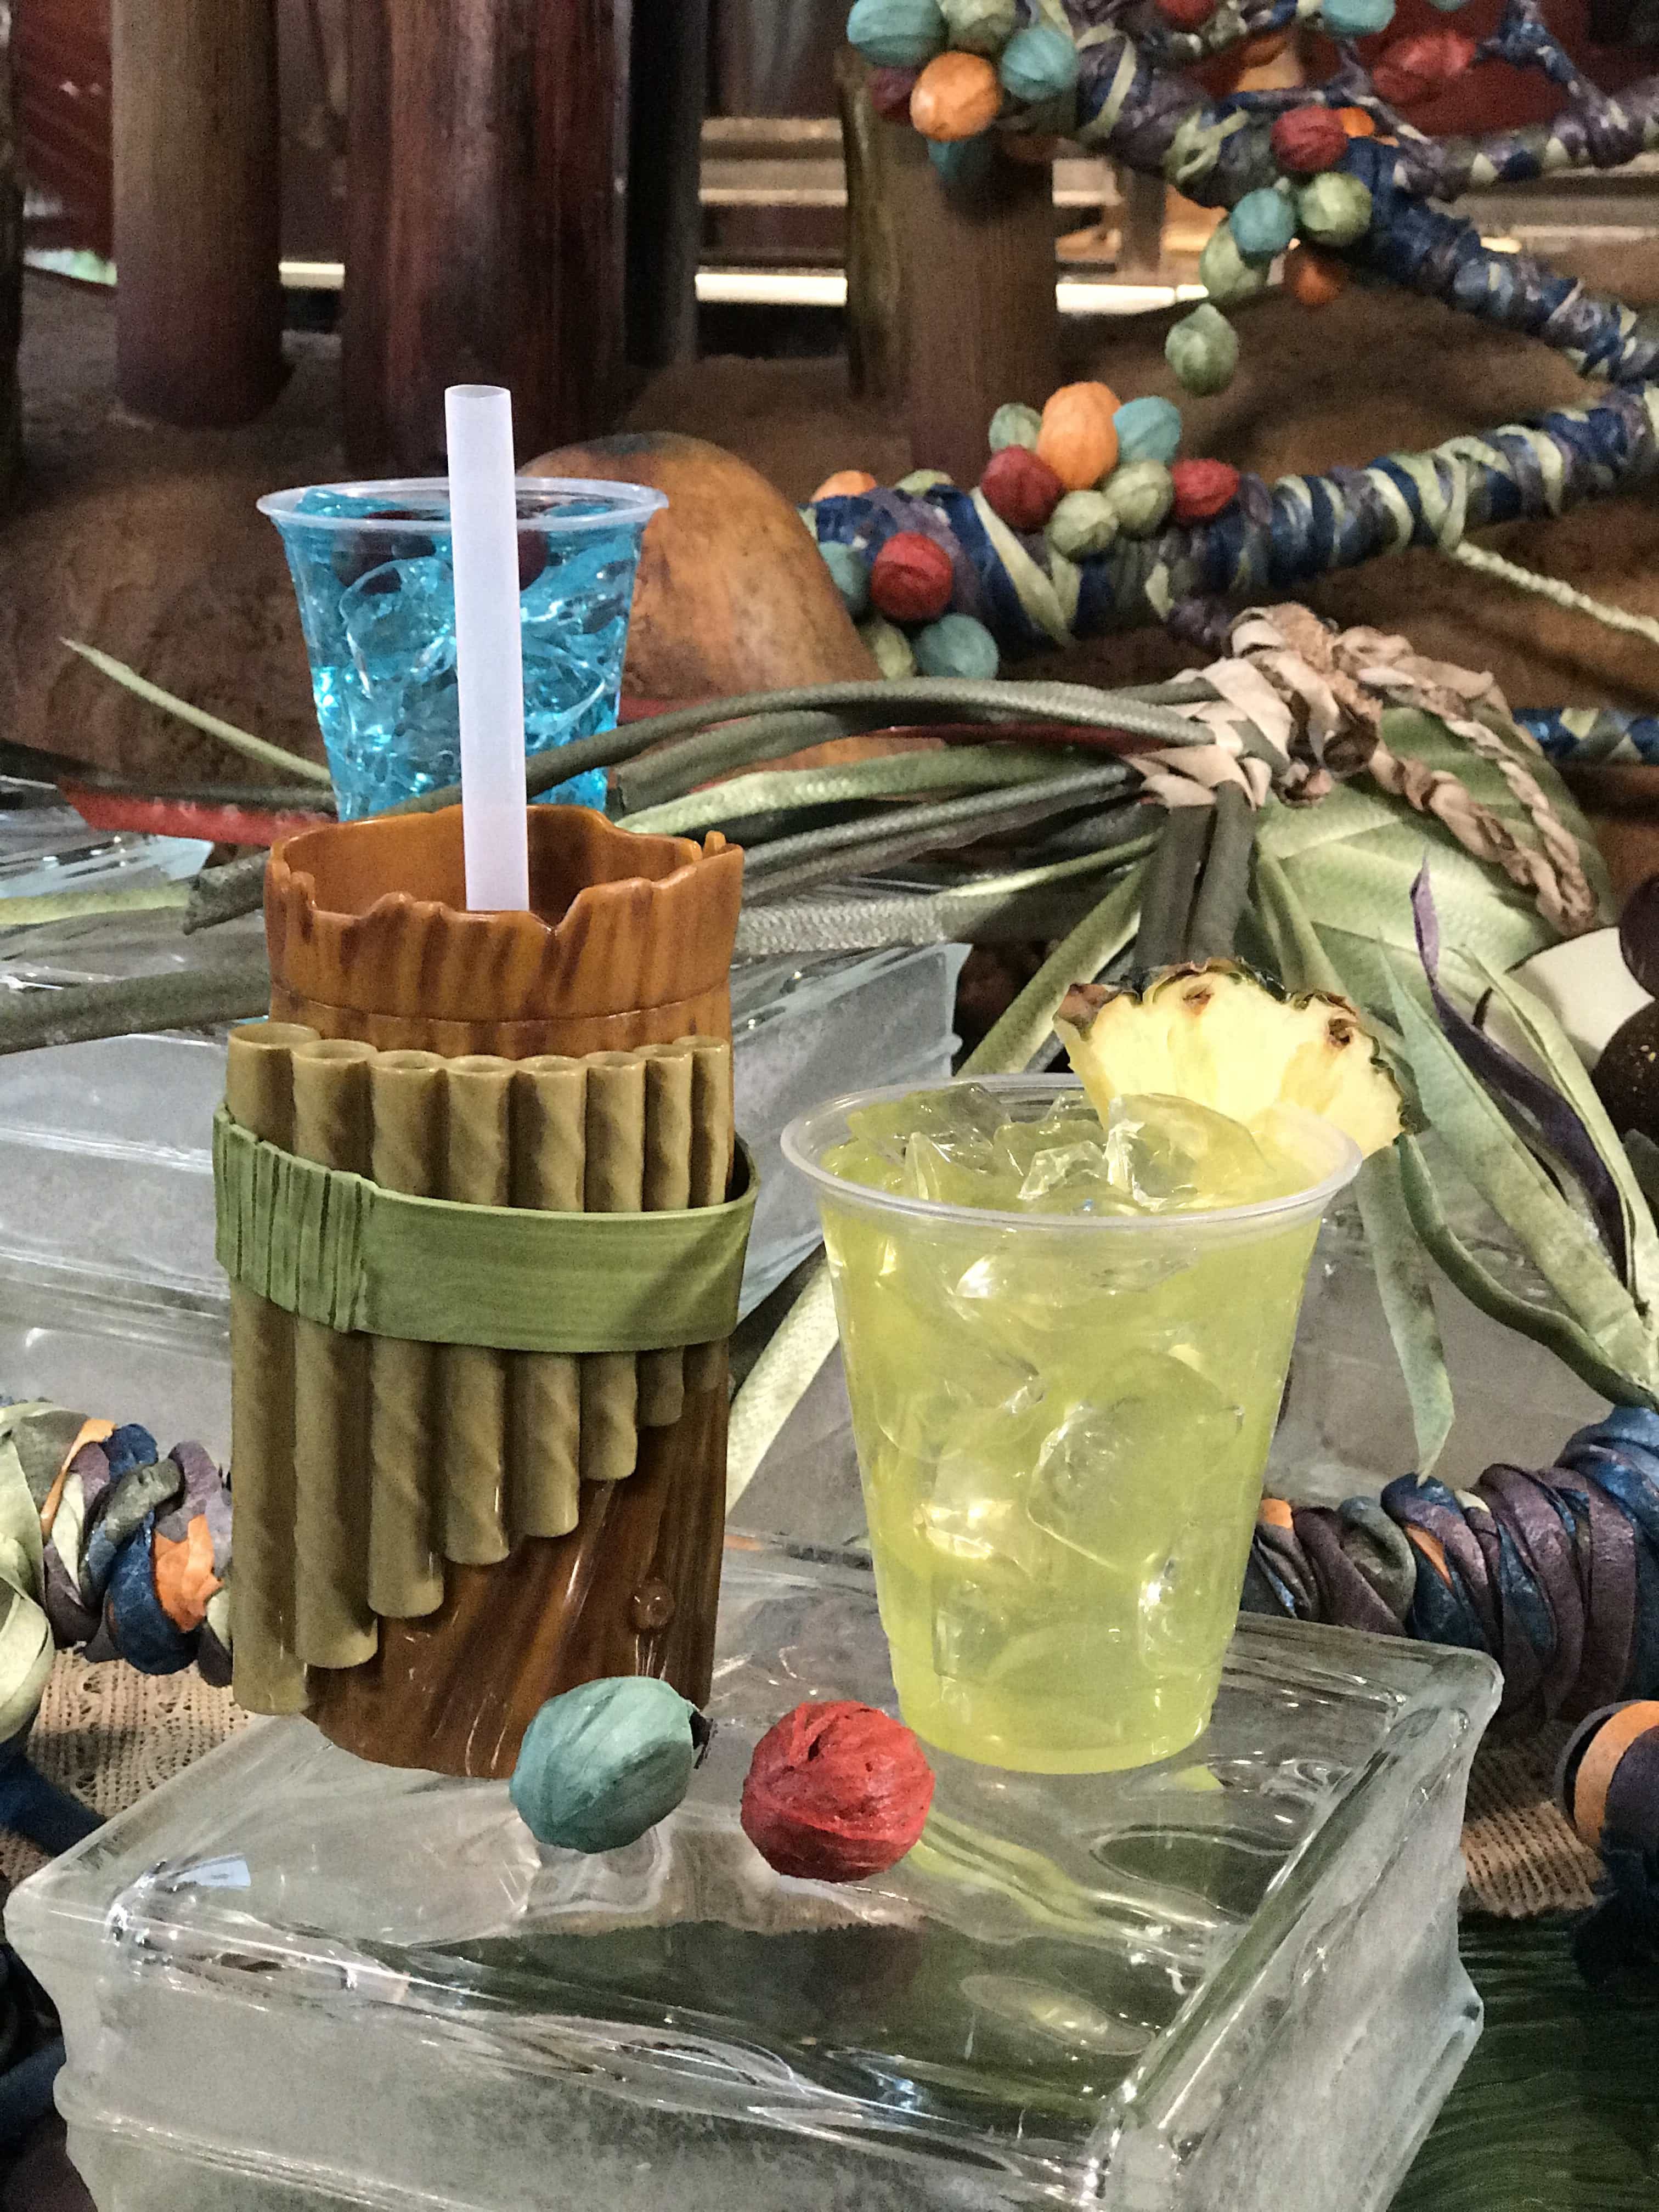 VIDEO: New Beverages At Pandora The World Of Avatar